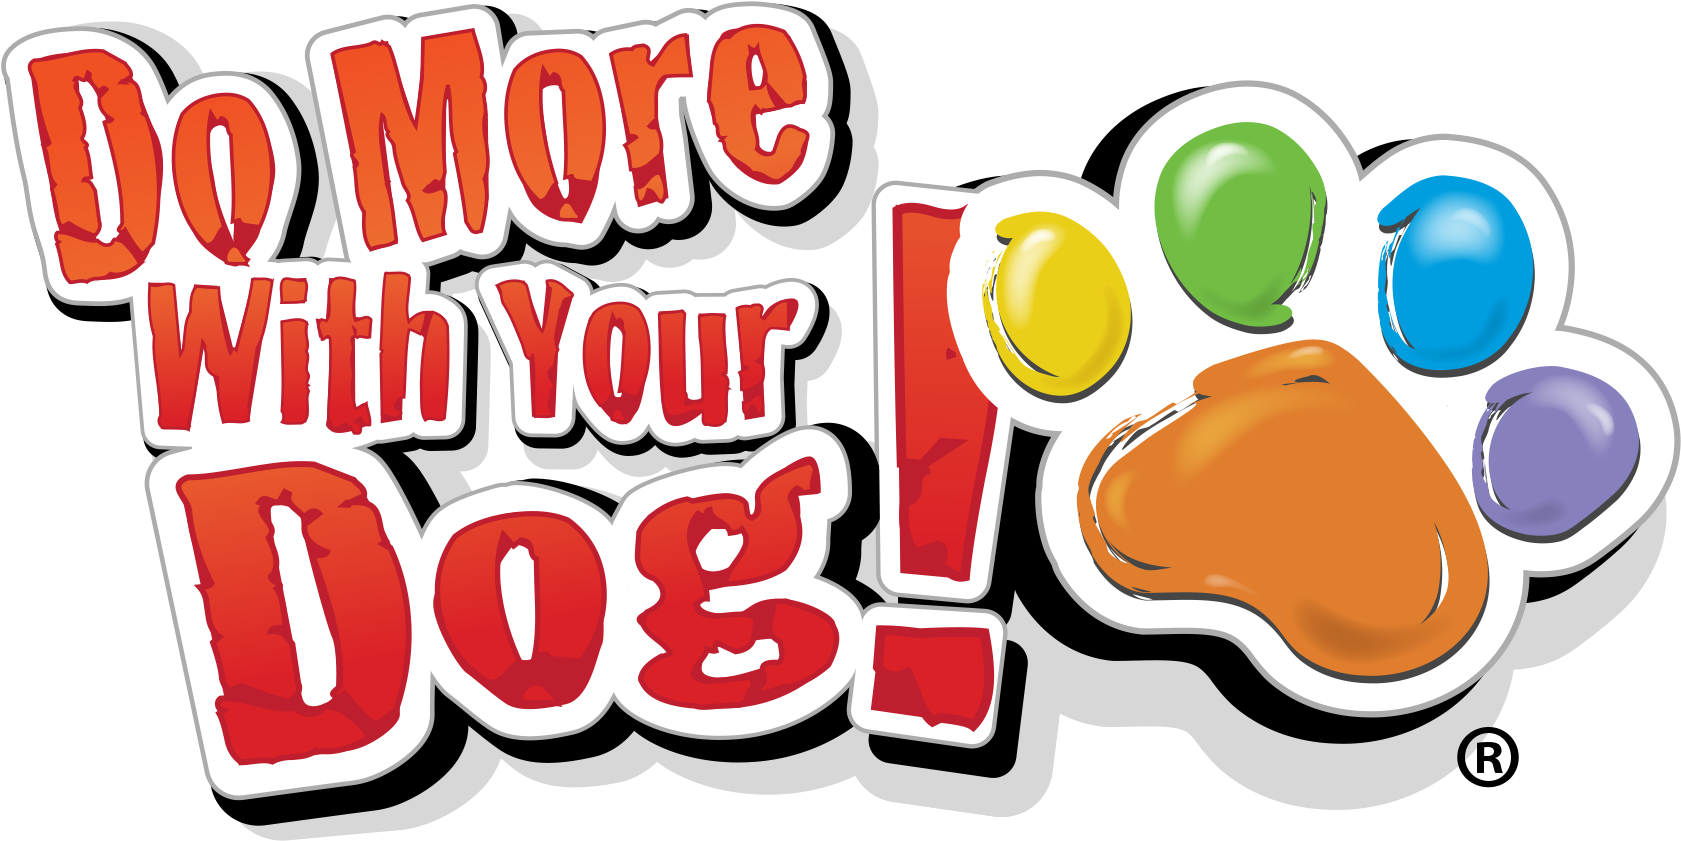 Do More With Your Dog Logo (1693x917)